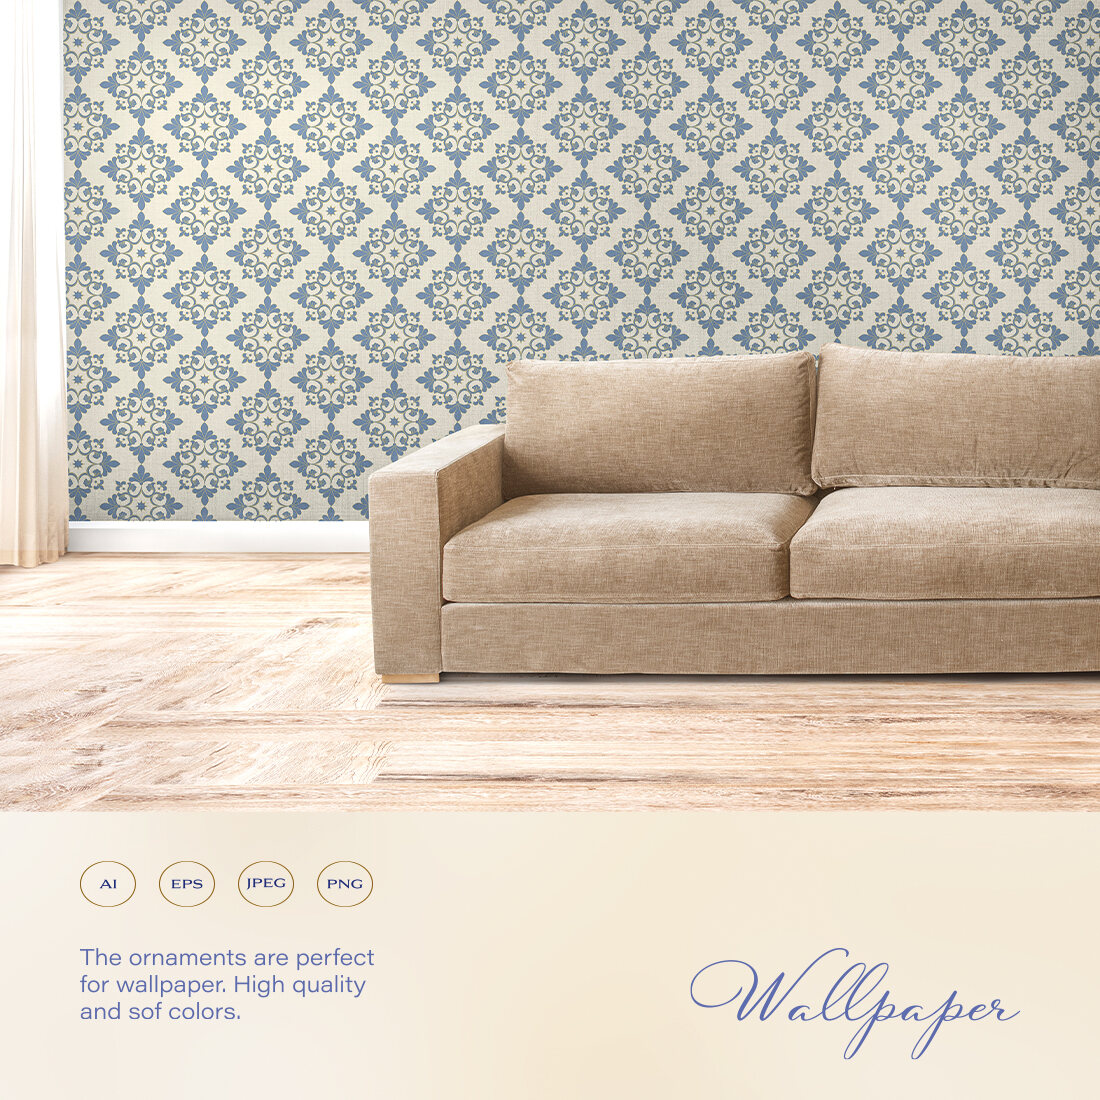 Seamless Patterns, Circular Ornaments and Frames in a Modern classic style